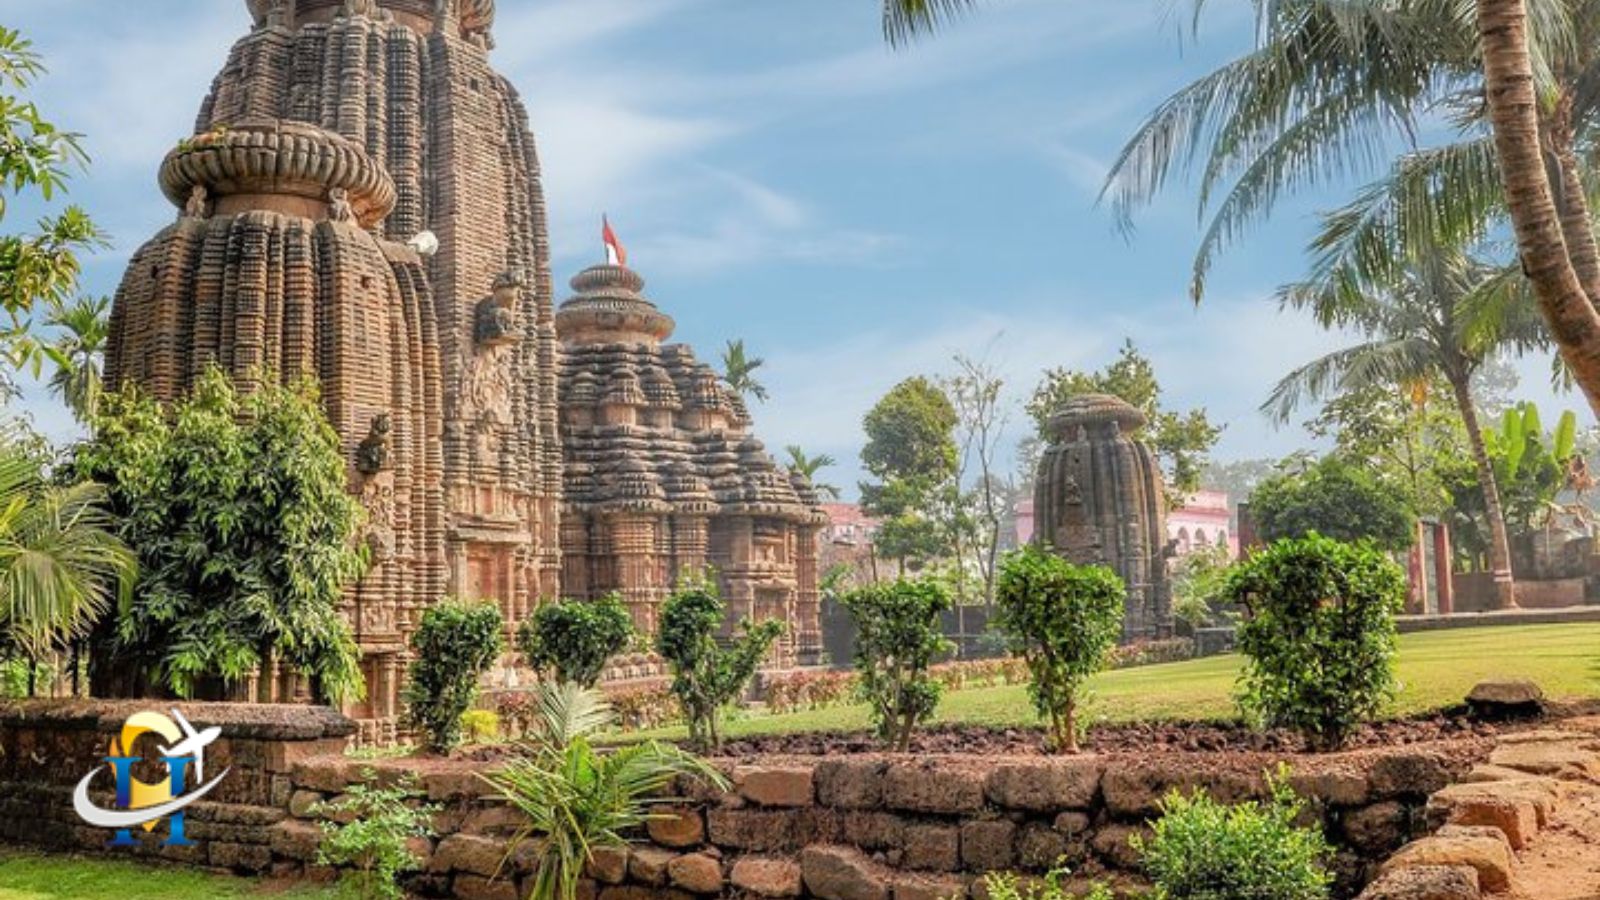 historical places in Odisha's now part of guided walking tours - HelloVisit